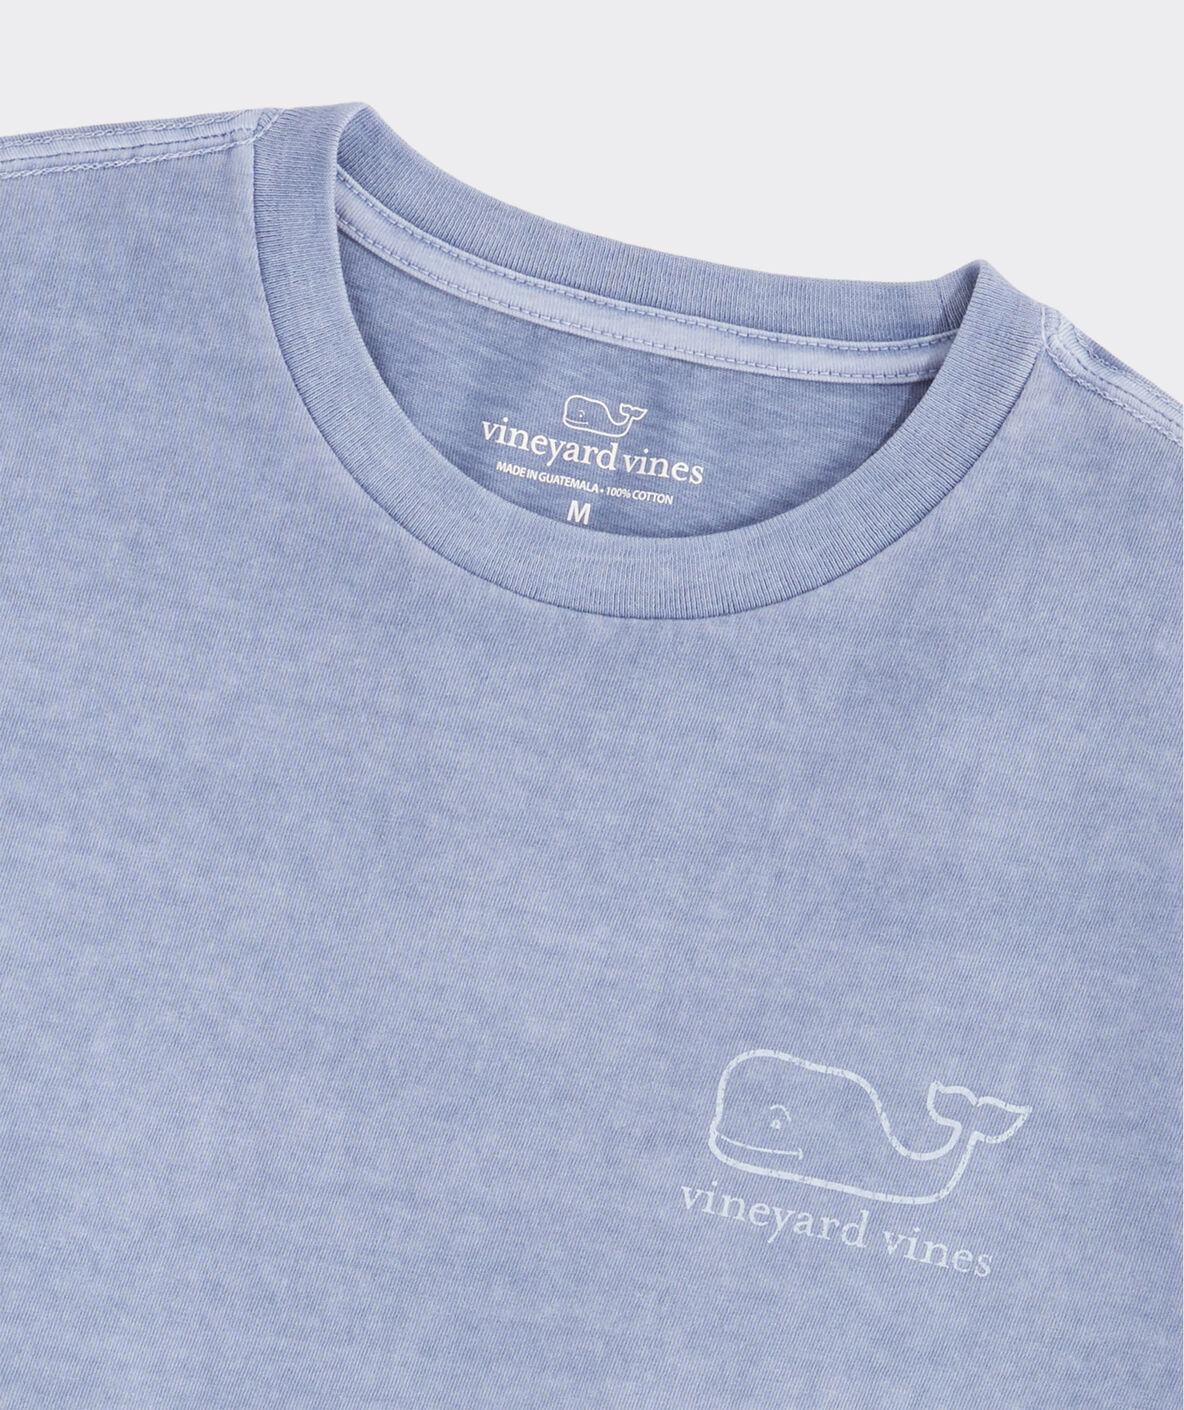 Garment Dyed Vintage Whale SS Tee - Summer Evening